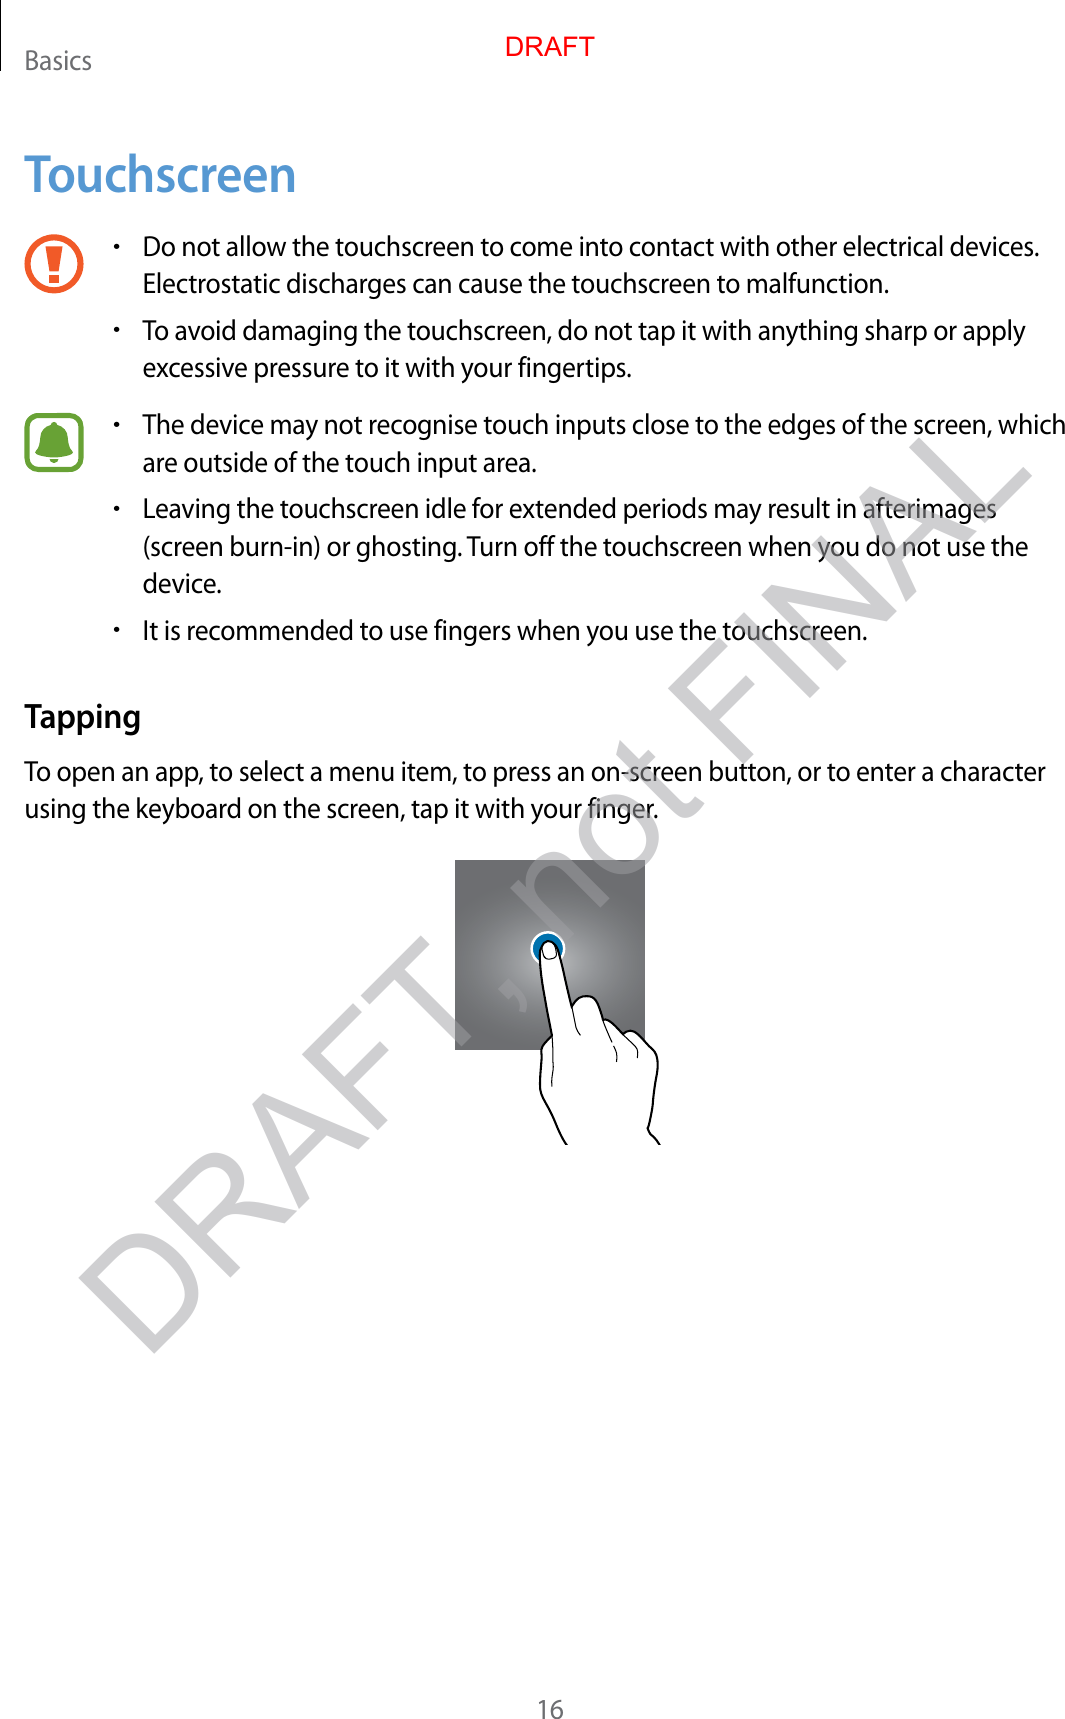 Basics16Touchscreen•Do not allow the touchscr een to c ome int o con tact with other electrical devices .Electrostatic discharges can cause the touchscr een t o malfunction.•To av oid damaging the t ouchscr een, do not tap it with an ything sharp or applyex cessiv e pr essur e t o it with y our fingertips.•The device ma y not r ecog nise t ouch inputs close to the edges of the scr een, whichare outside of the touch input ar ea.•Lea ving the t ouchscr een idle f or extended periods may r esult in afterimages(screen burn-in) or ghosting . Turn off the touchscreen when you do not use thedevice.•It is recommended to use fingers when you use the t ouchscr een.TappingTo open an app , t o select a menu item, to pr ess an on-scr een button, or t o ent er a character using the keyboard on the scr een, tap it with y our finger.DRAFT, not FINALDRAFT